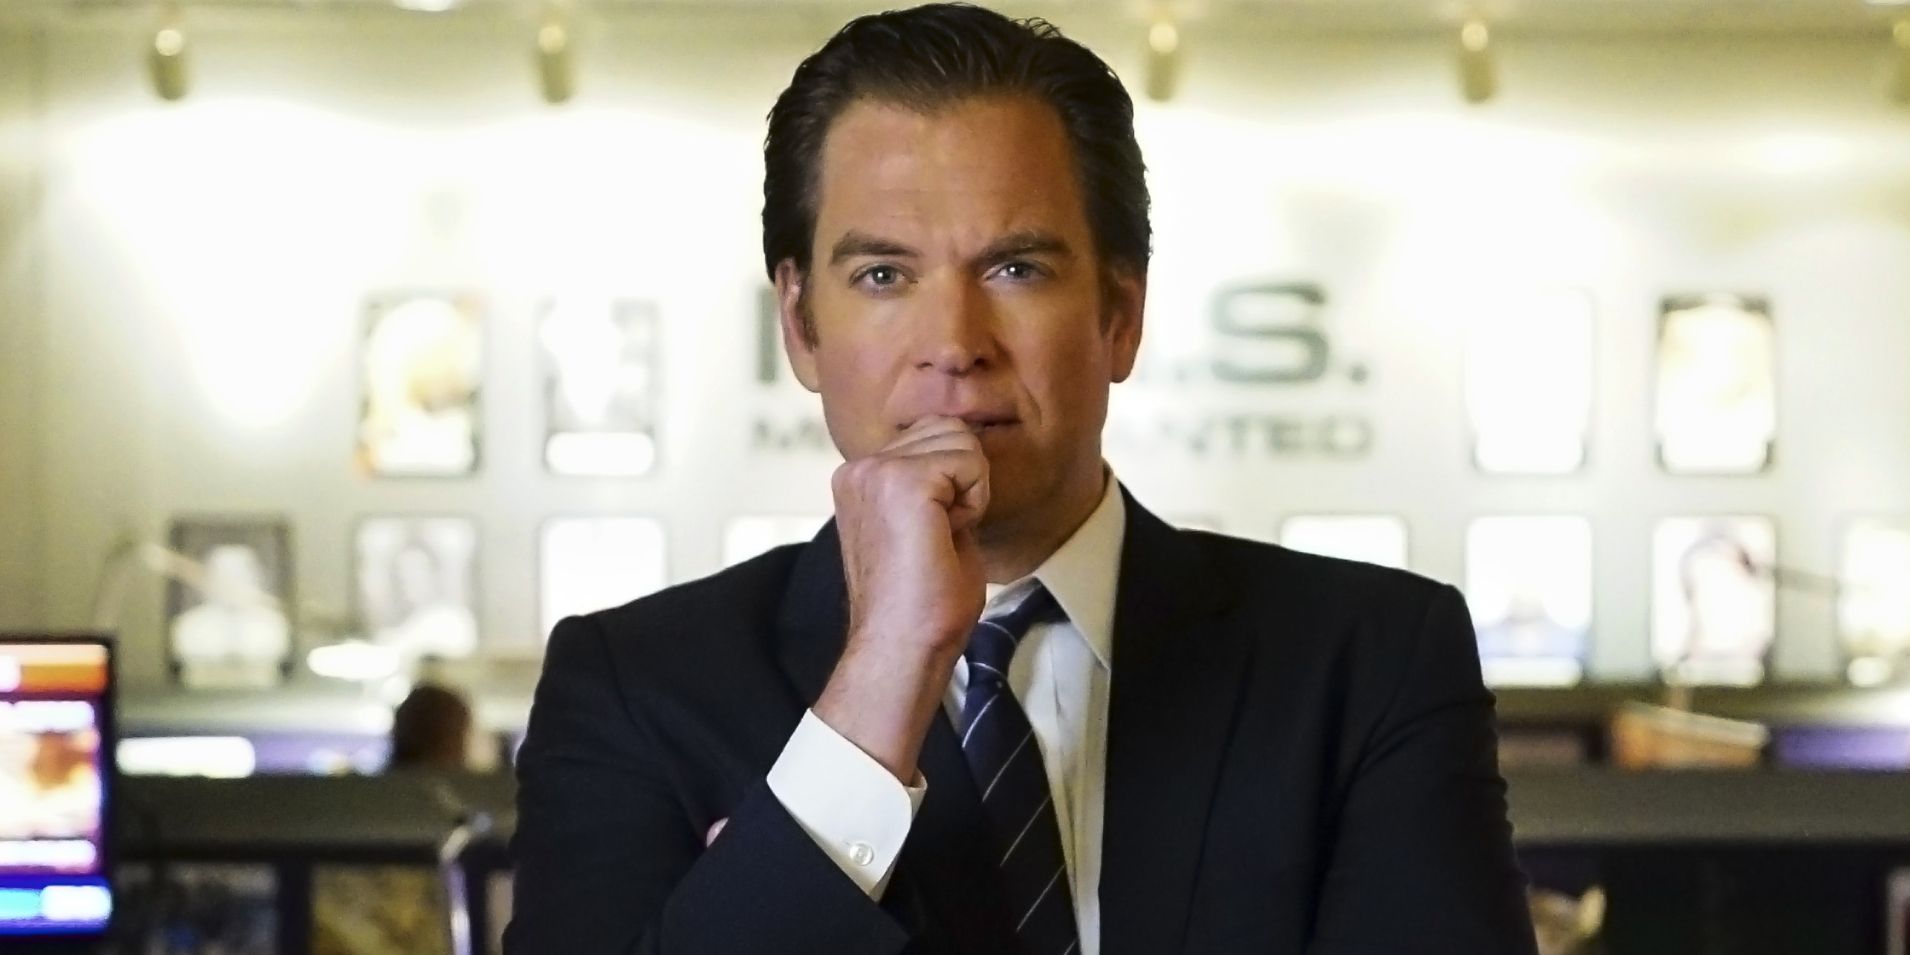 Tony DiNozzo thinking with his hand raised to his mouth in NCIS